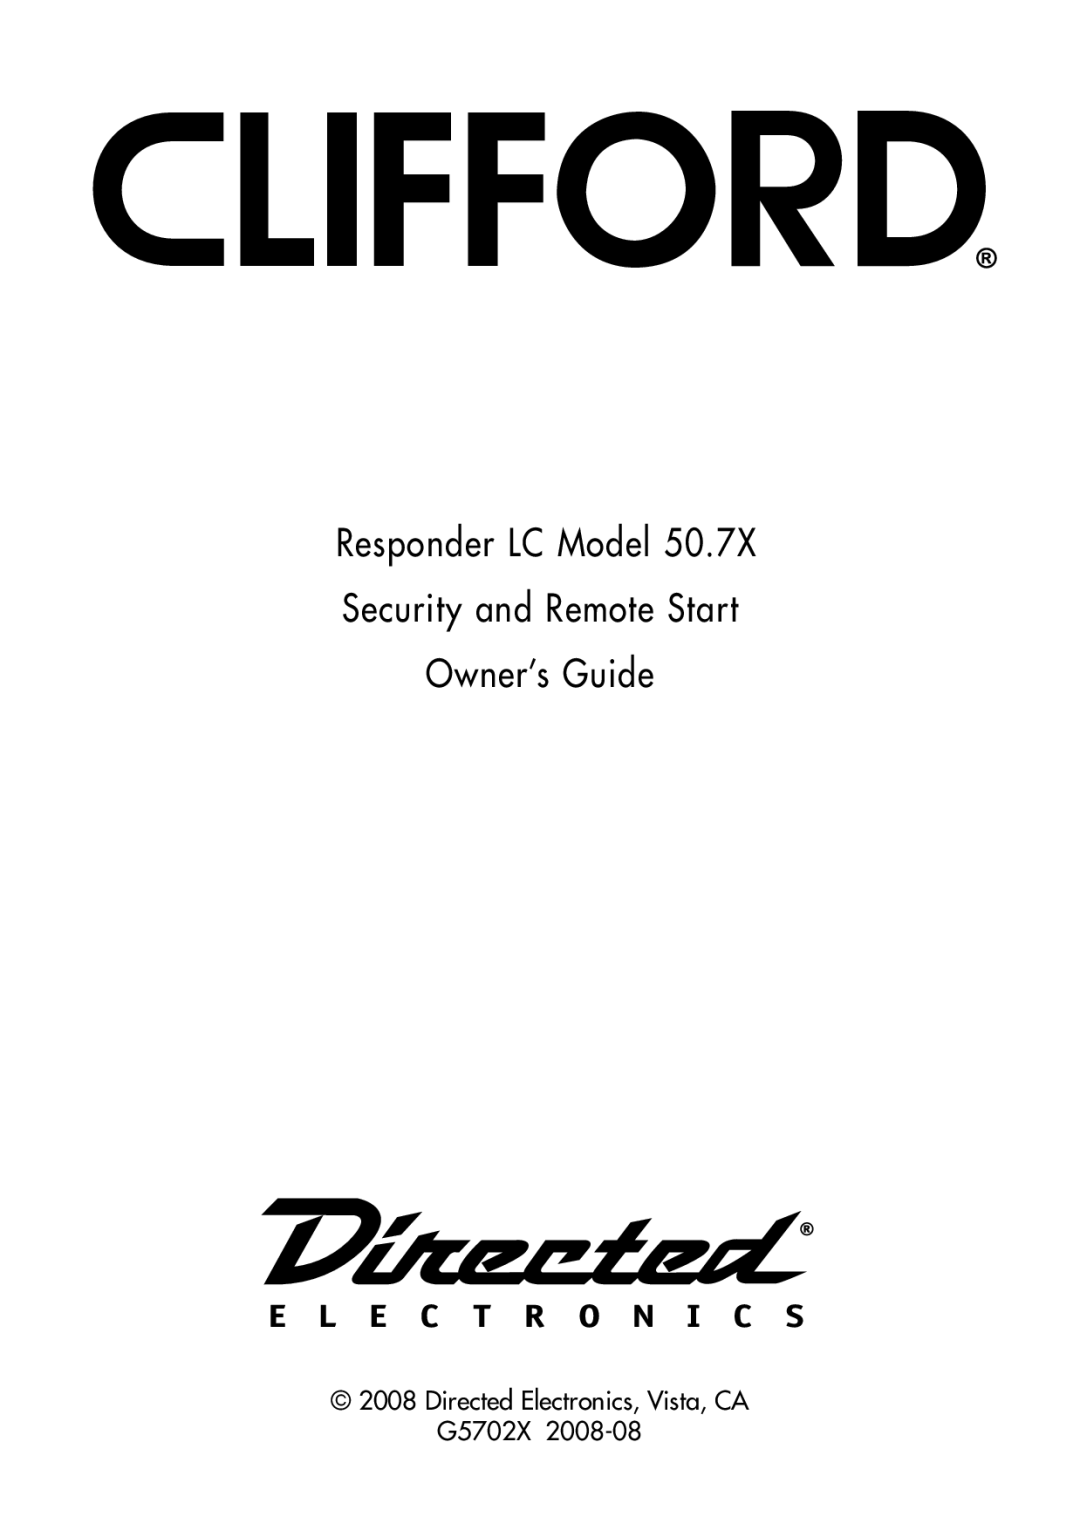 Clifford 50.7X manual Responder LC Model Security and Remote Start Owner’s Guide 